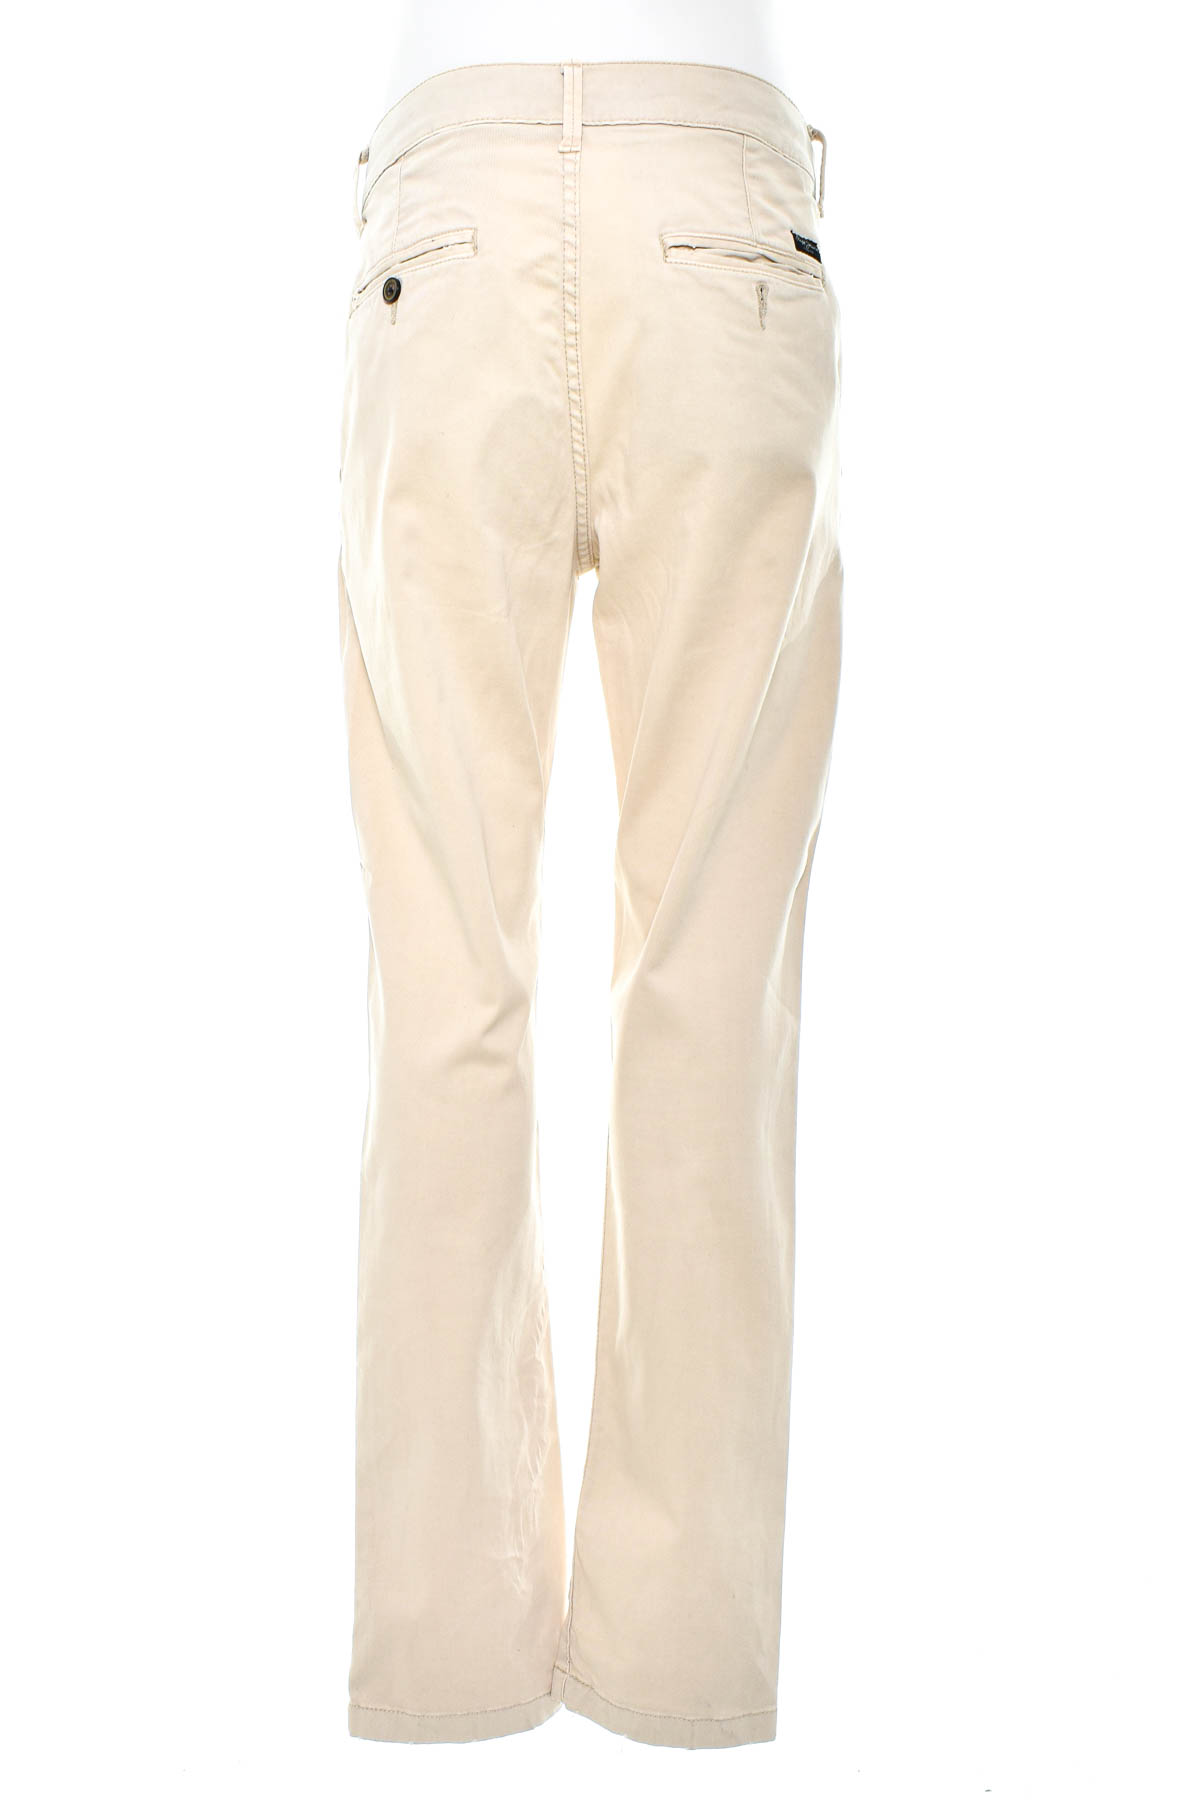 Men's trousers - Pepe Jeans - 1